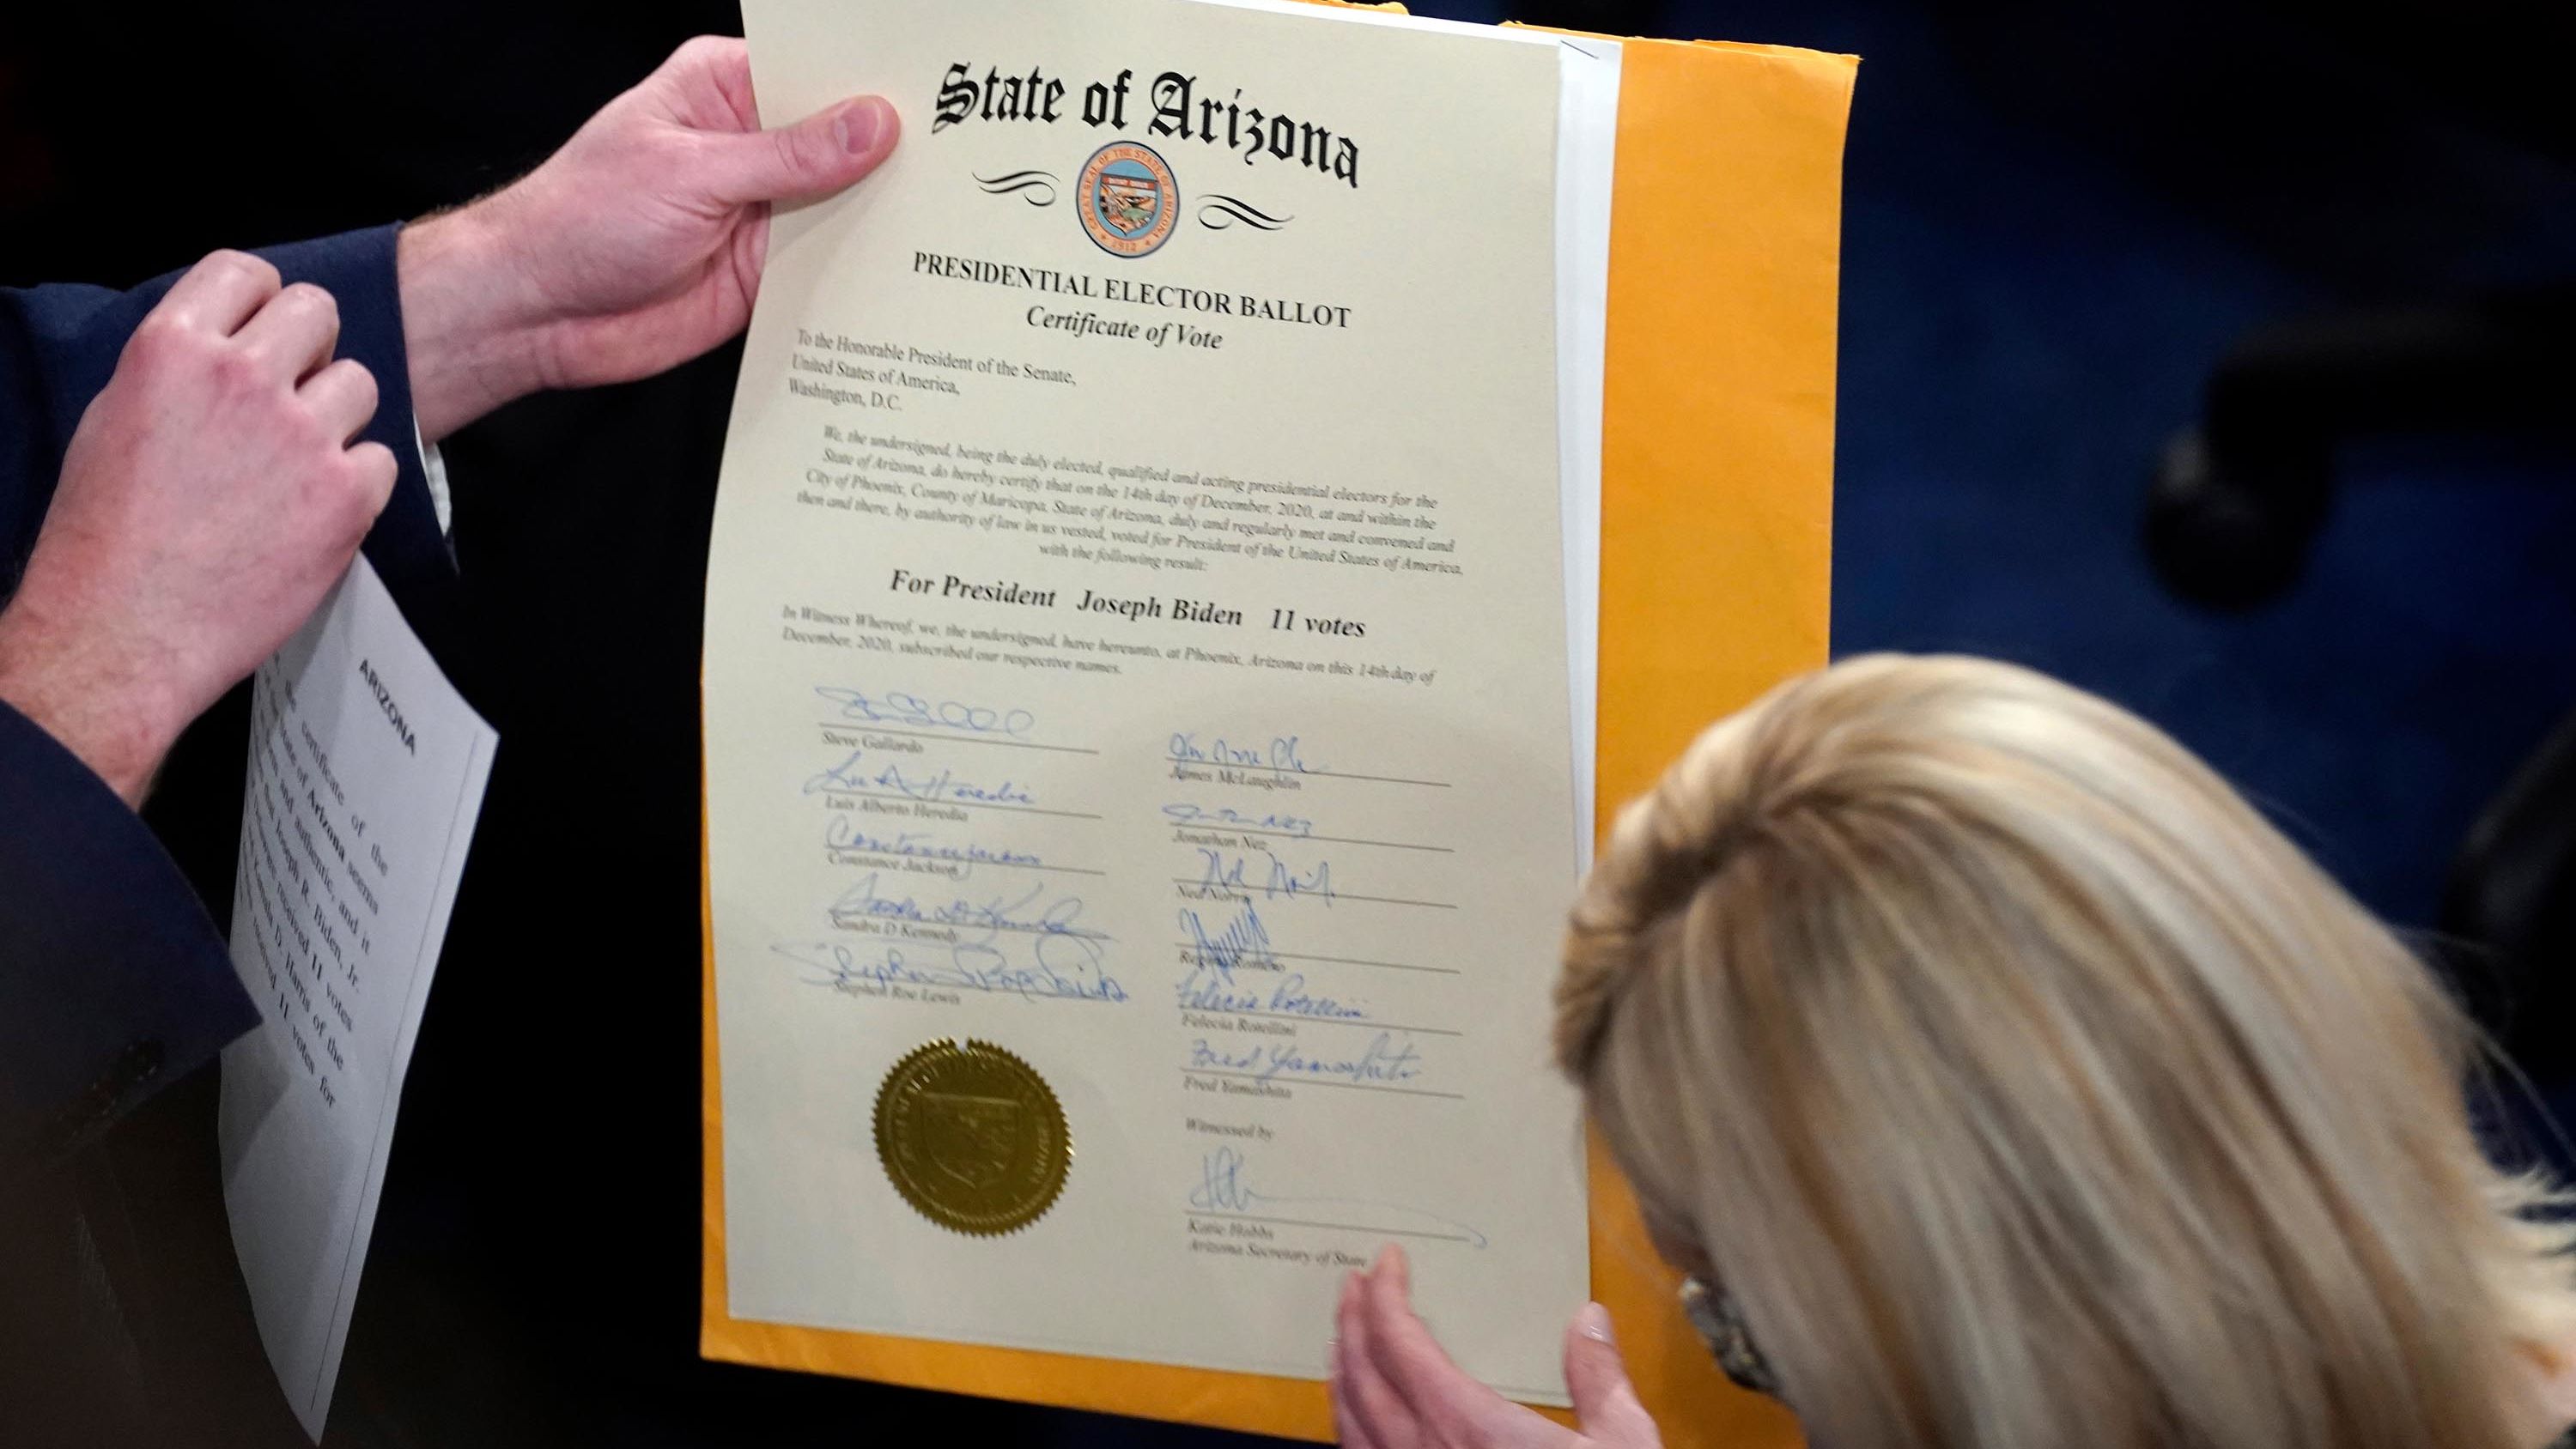 The certification of Arizona's Electoral College votes is unsealed during the joint session of Congress.